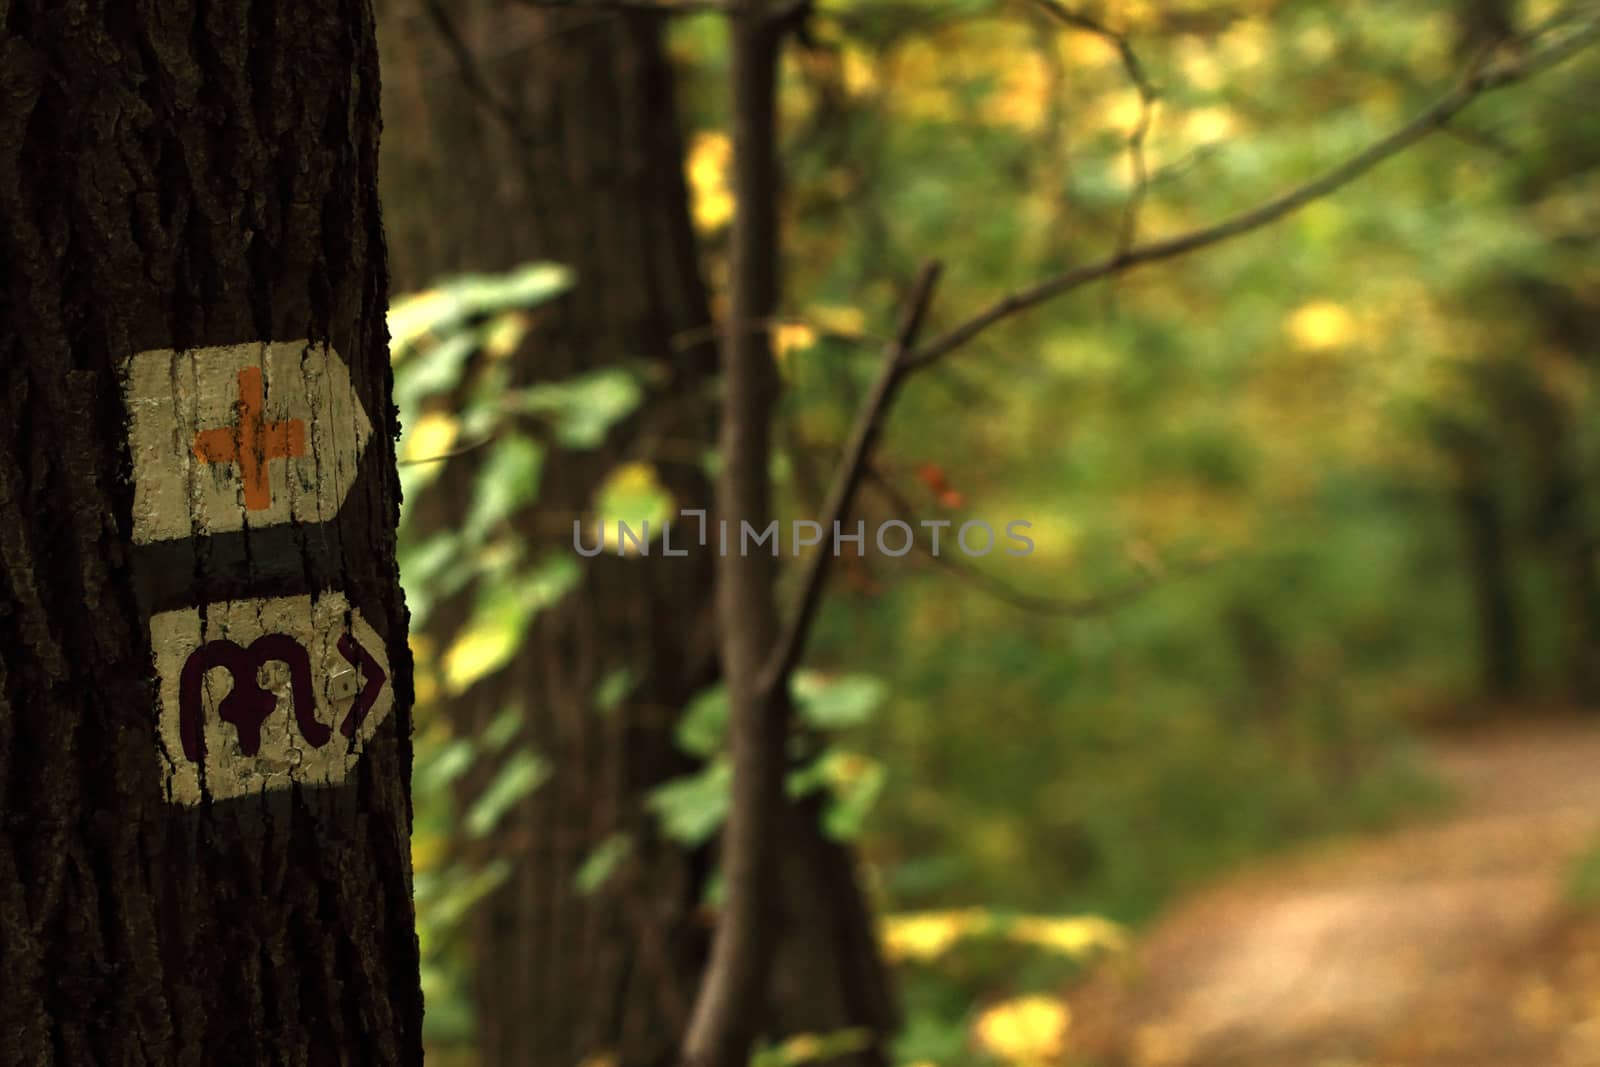 Hike sign by Nneirda